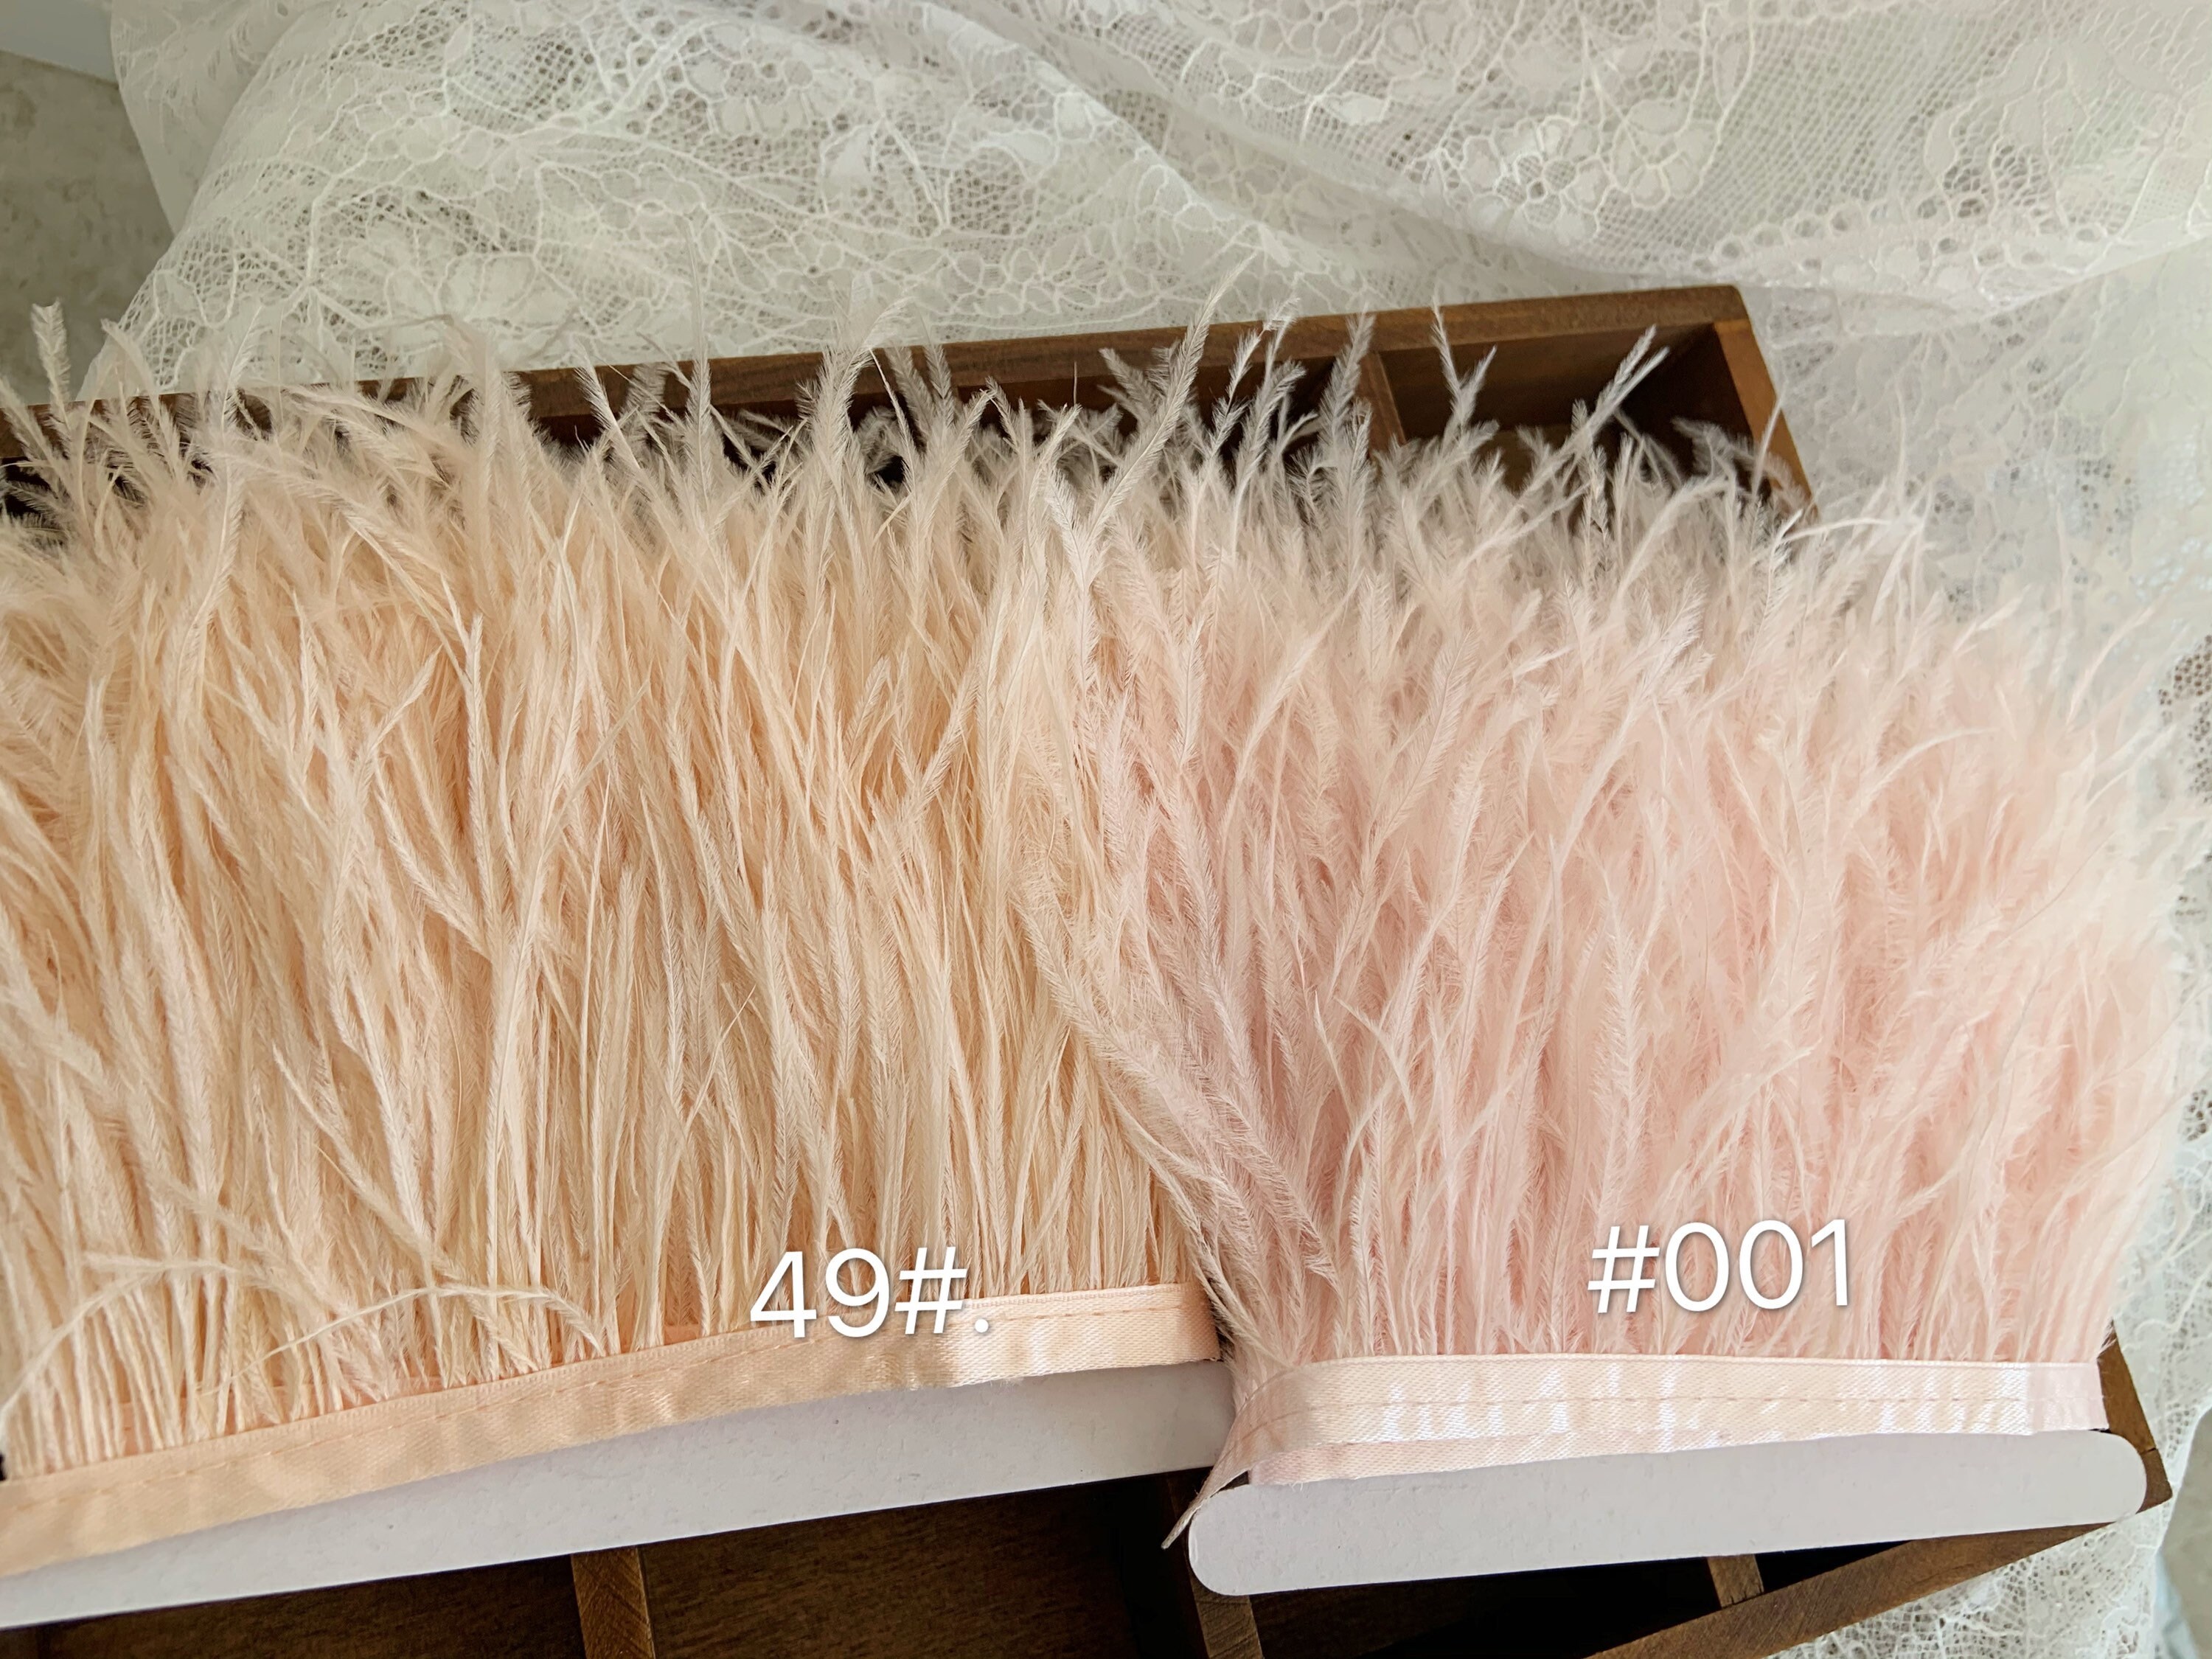 10 Yards 50 Colors Ostrich Feather Fringe Trim With Ribbon Tape 